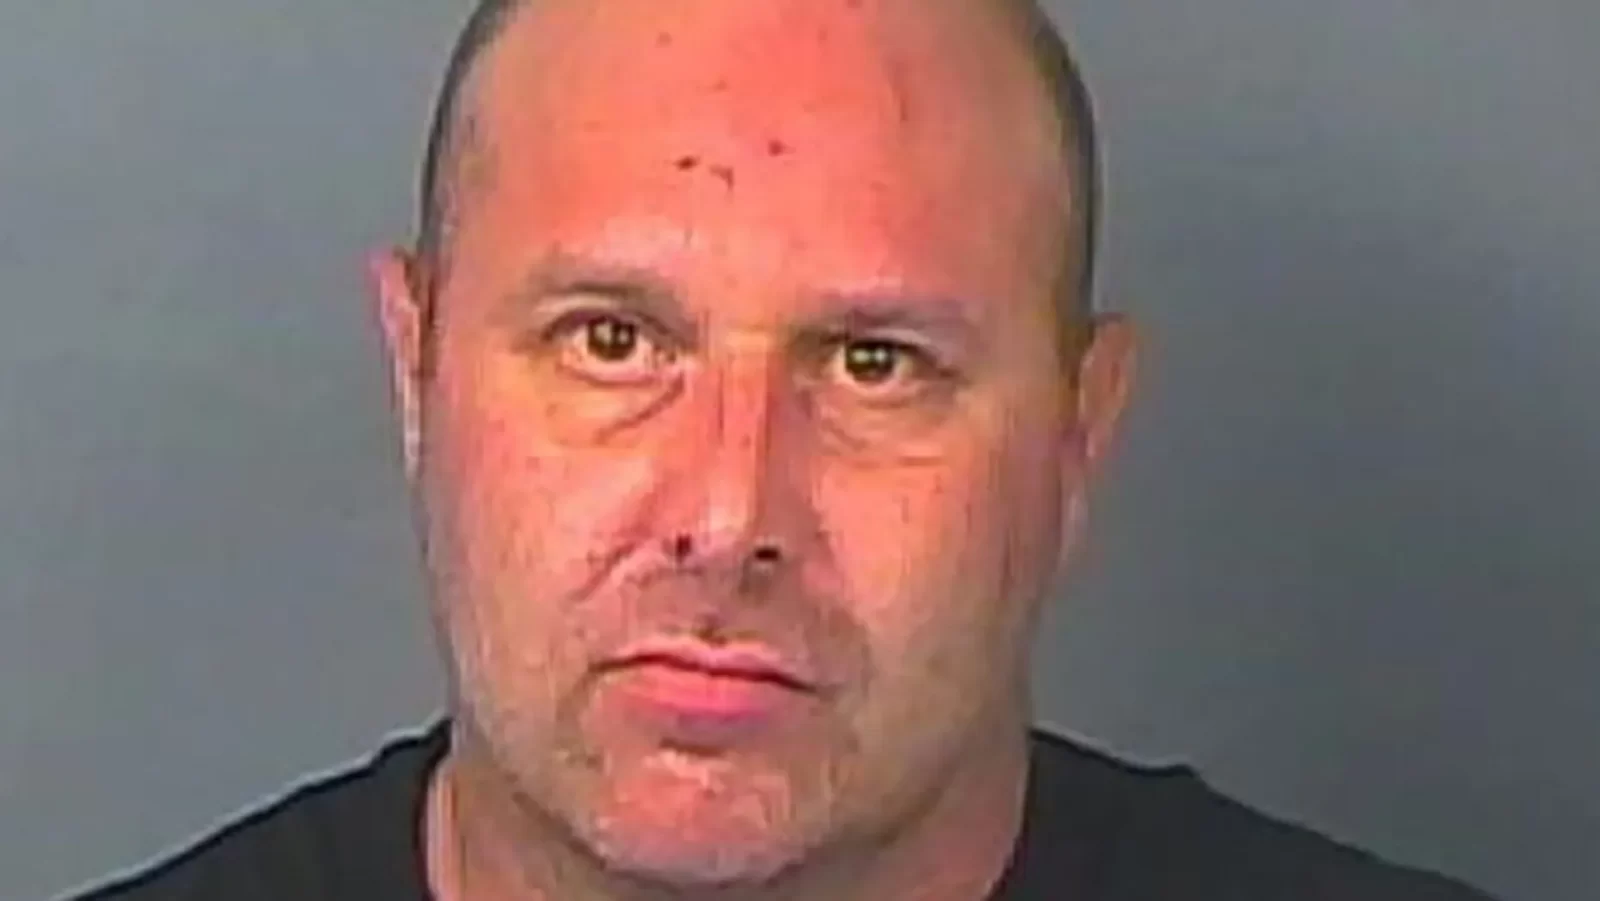 Florida man accused of calling 911 to have meth tested for authenticity, authorities say